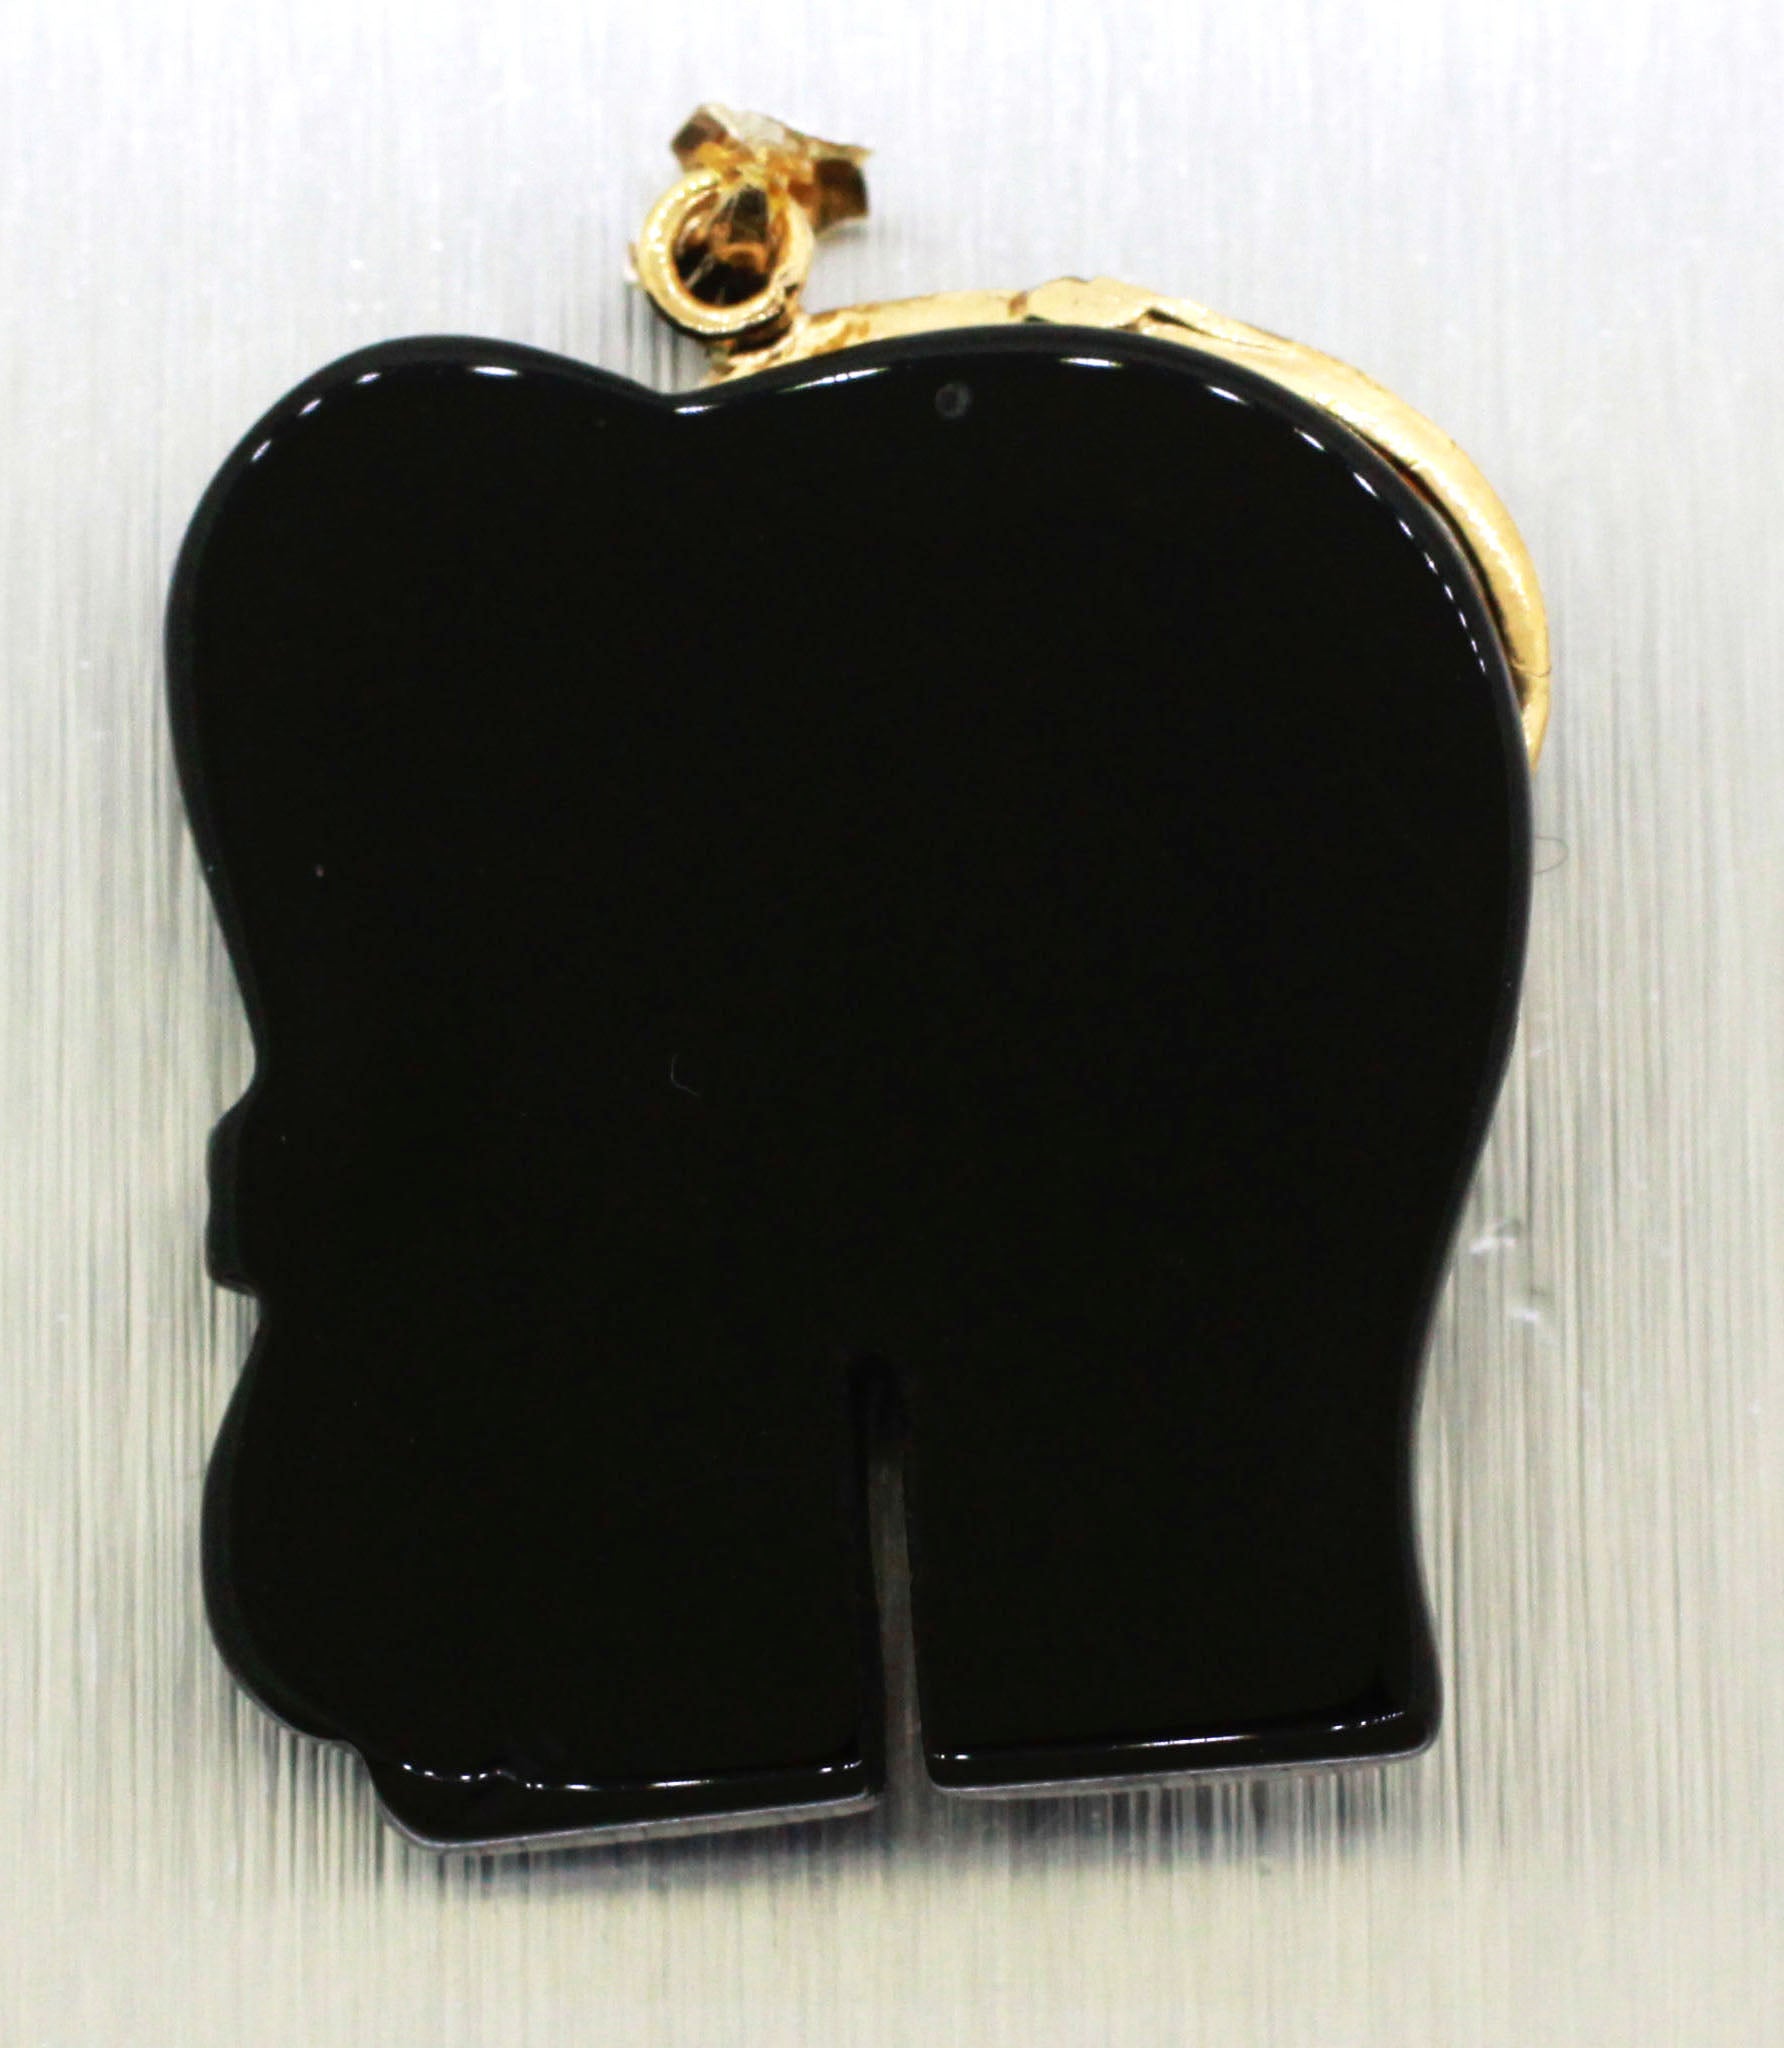 Vintage Carved Black Onyx Elephant Pendant Charm - 14k Solid Yellow Gold